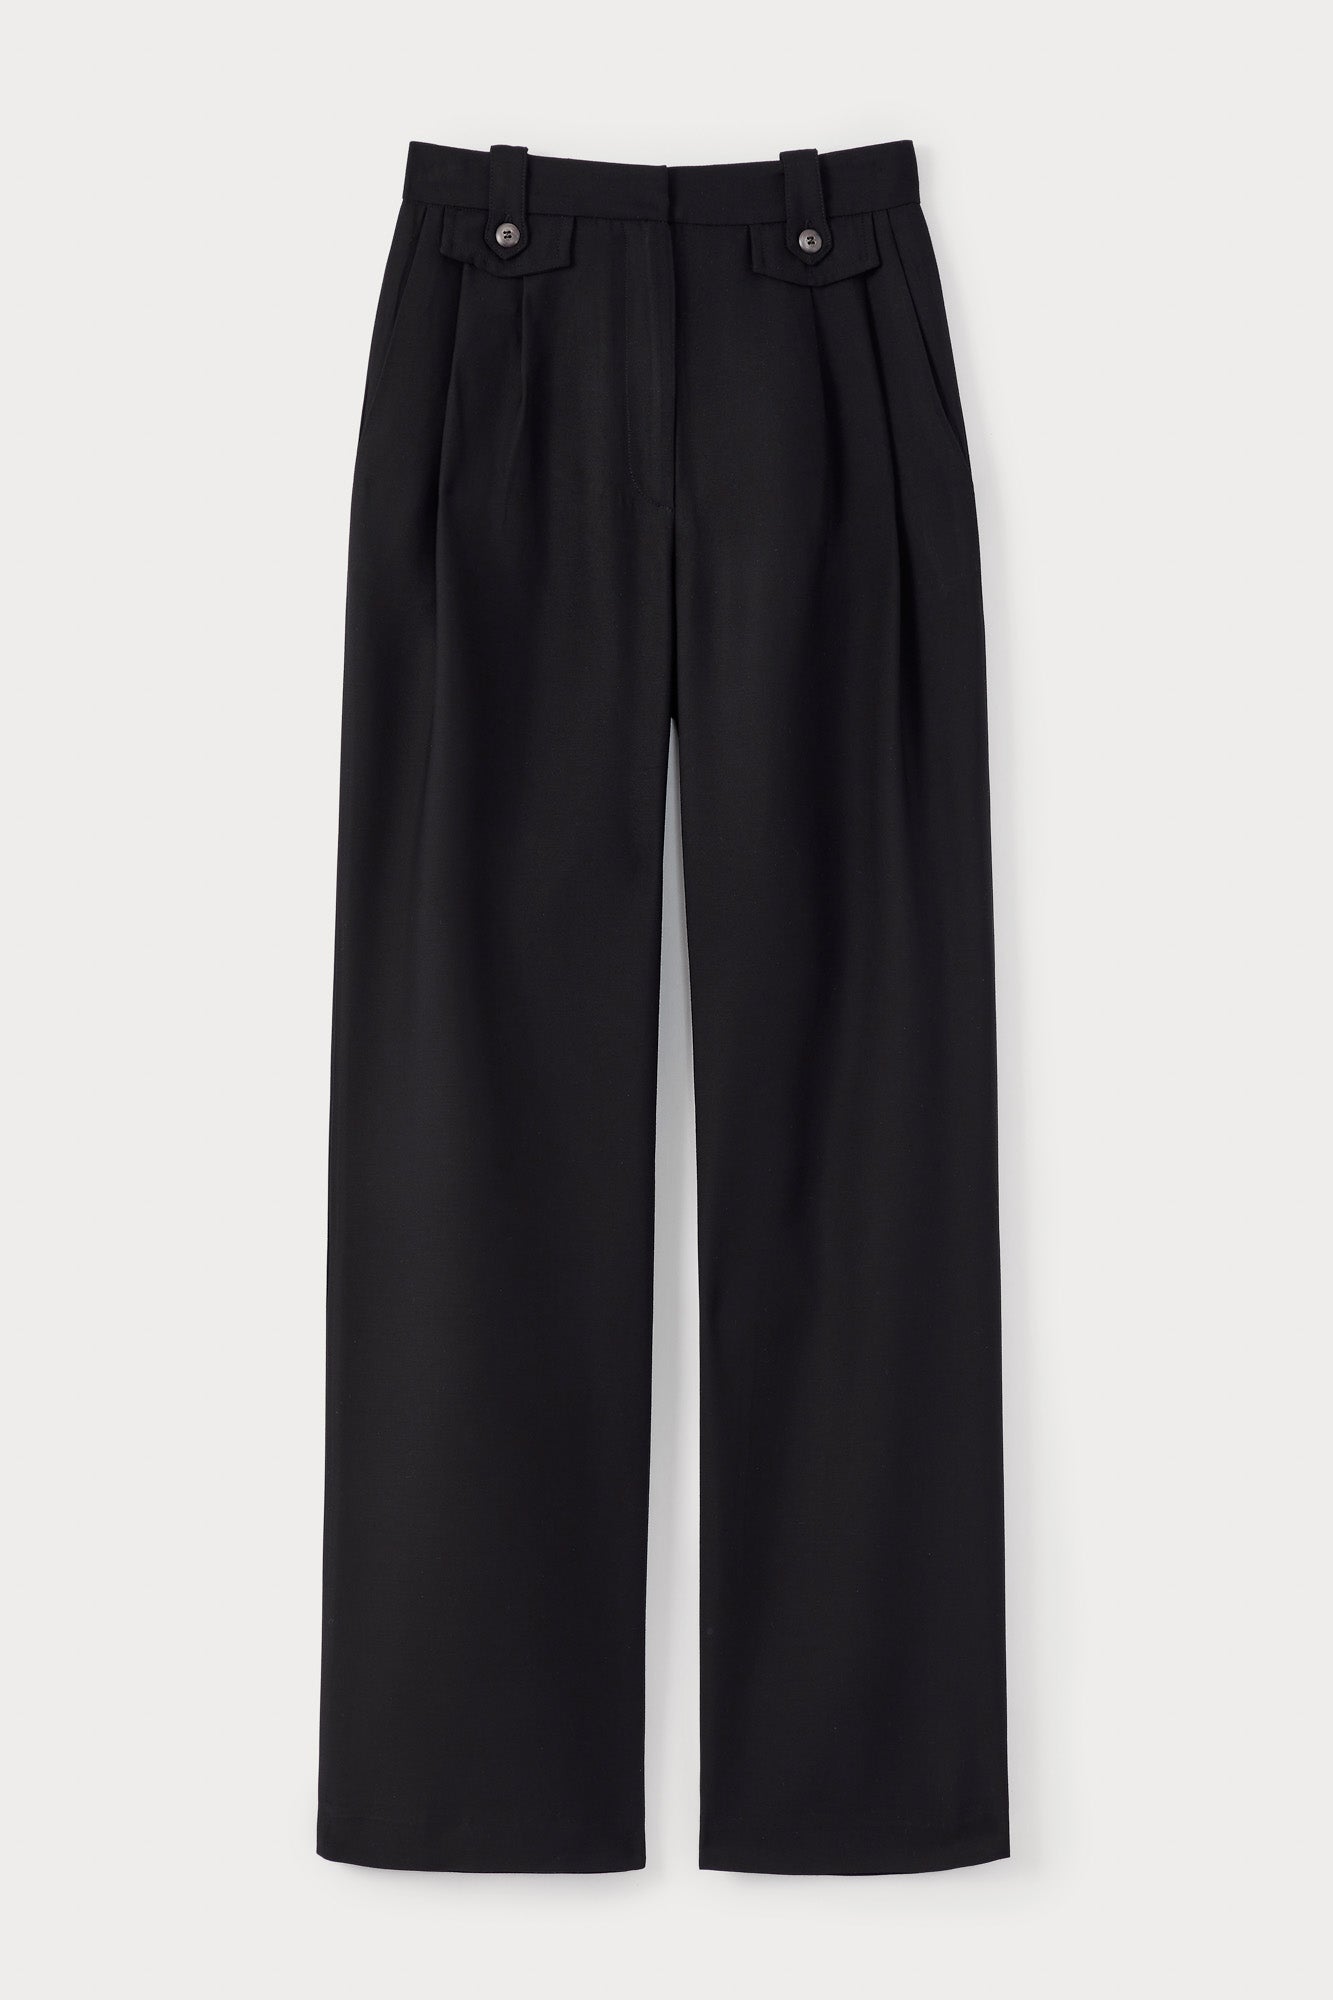 BLACK High-Waisted Trousers